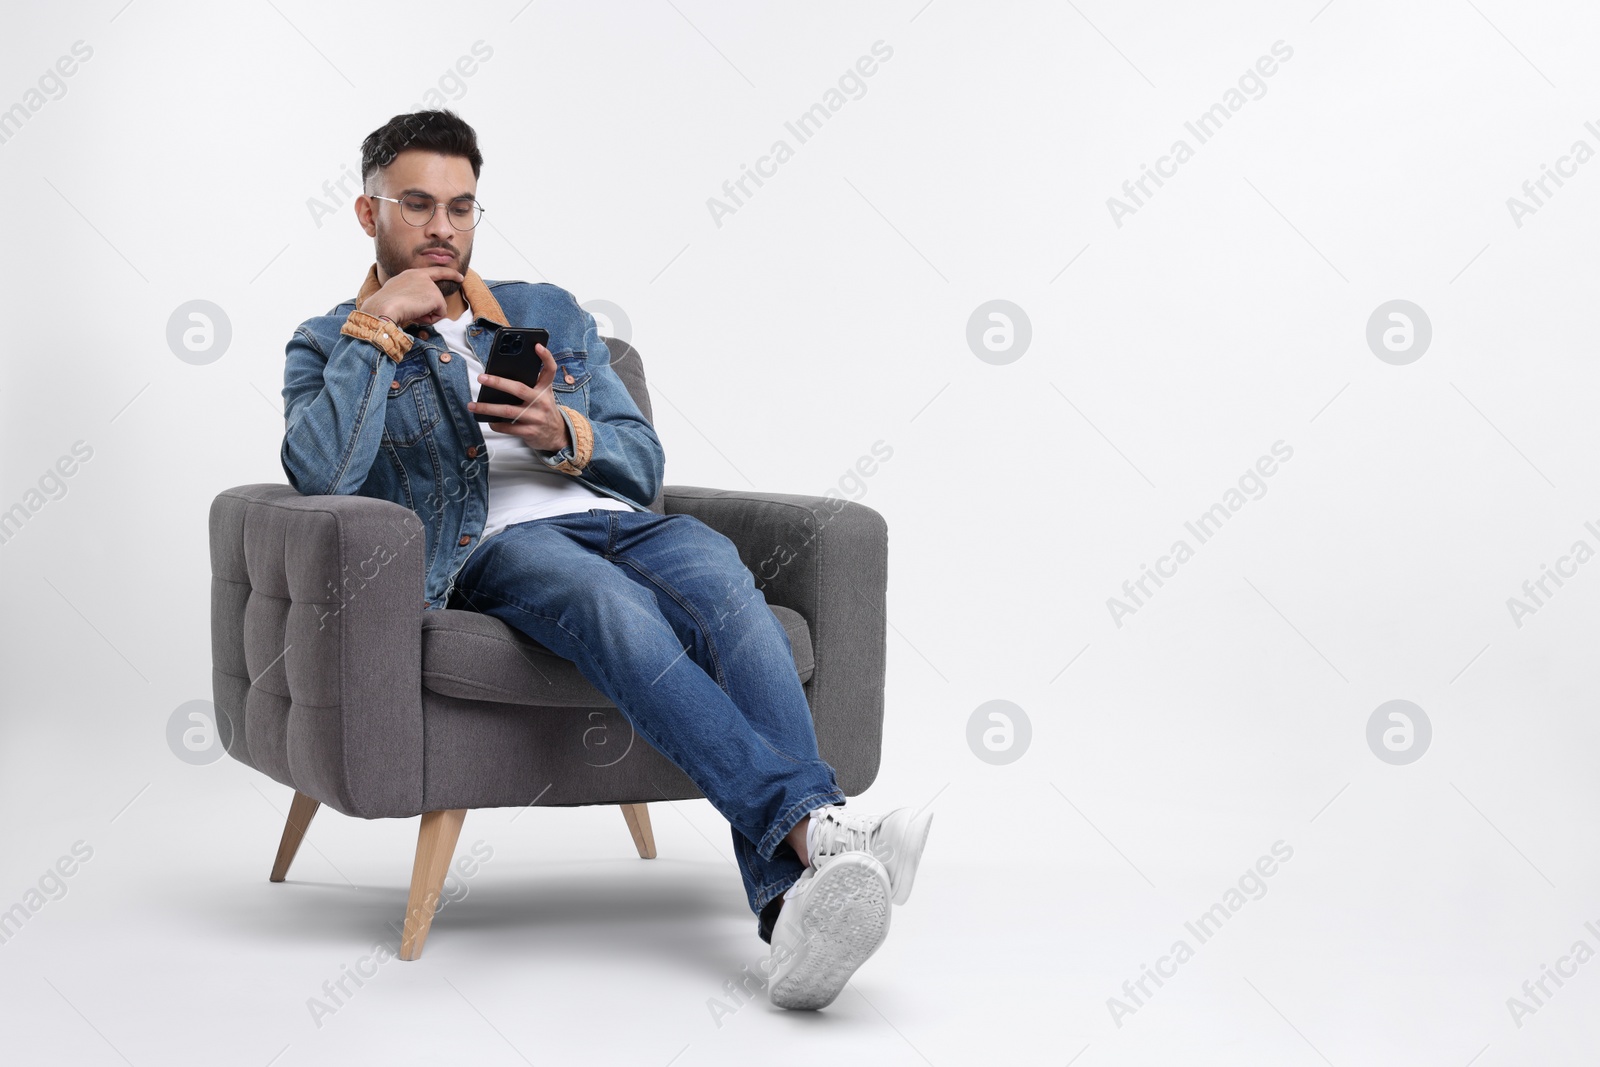 Photo of Handsome man using smartphone in armchair on white background, space for text